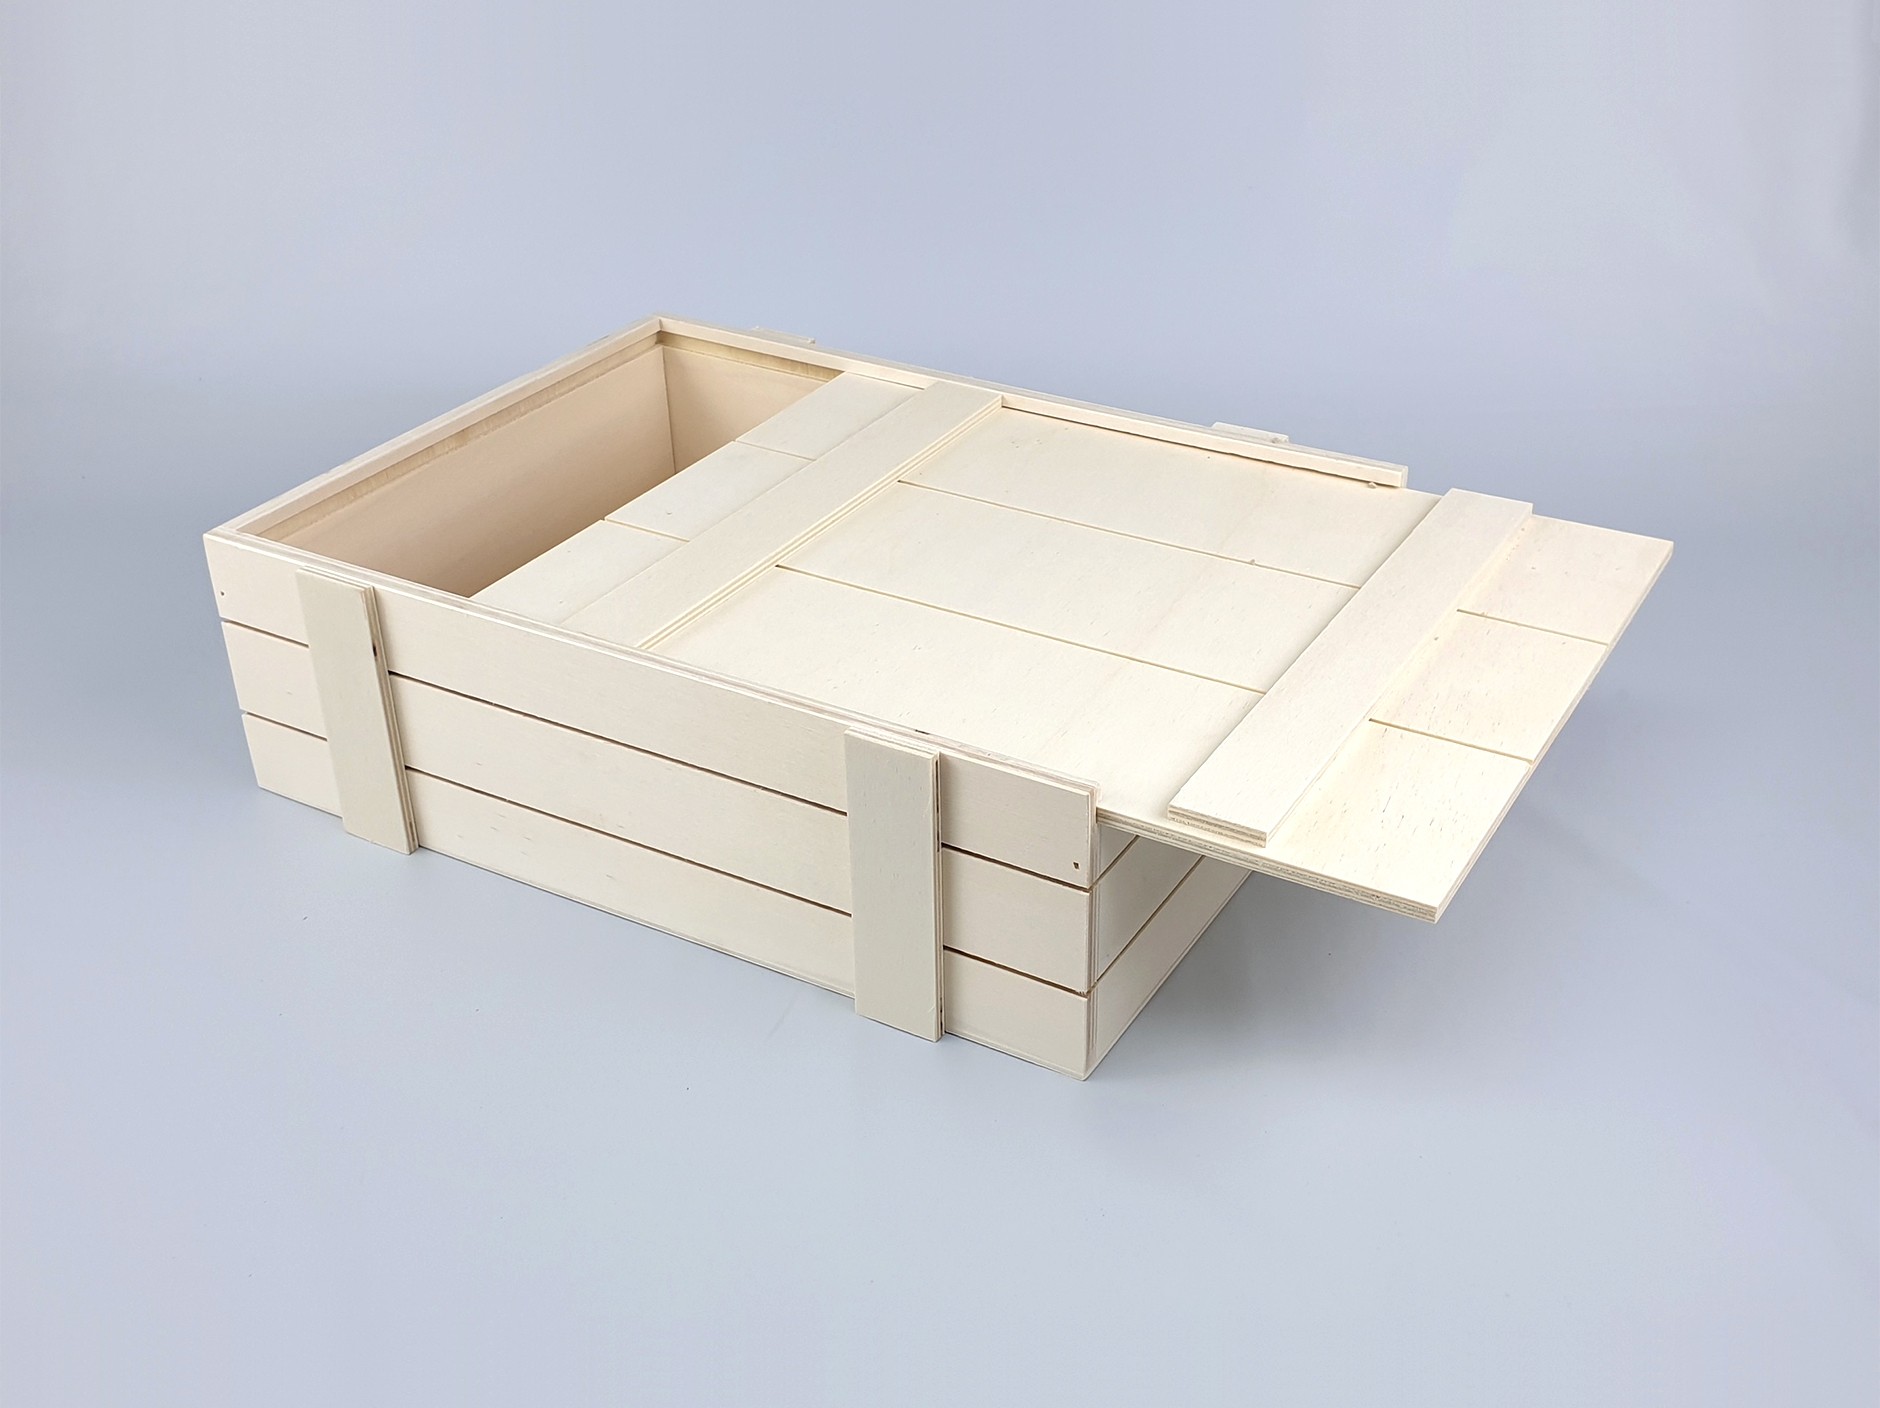 Packaging type wooden box 35x27x10 cm. with sliding lid Ref.P1454C10RT